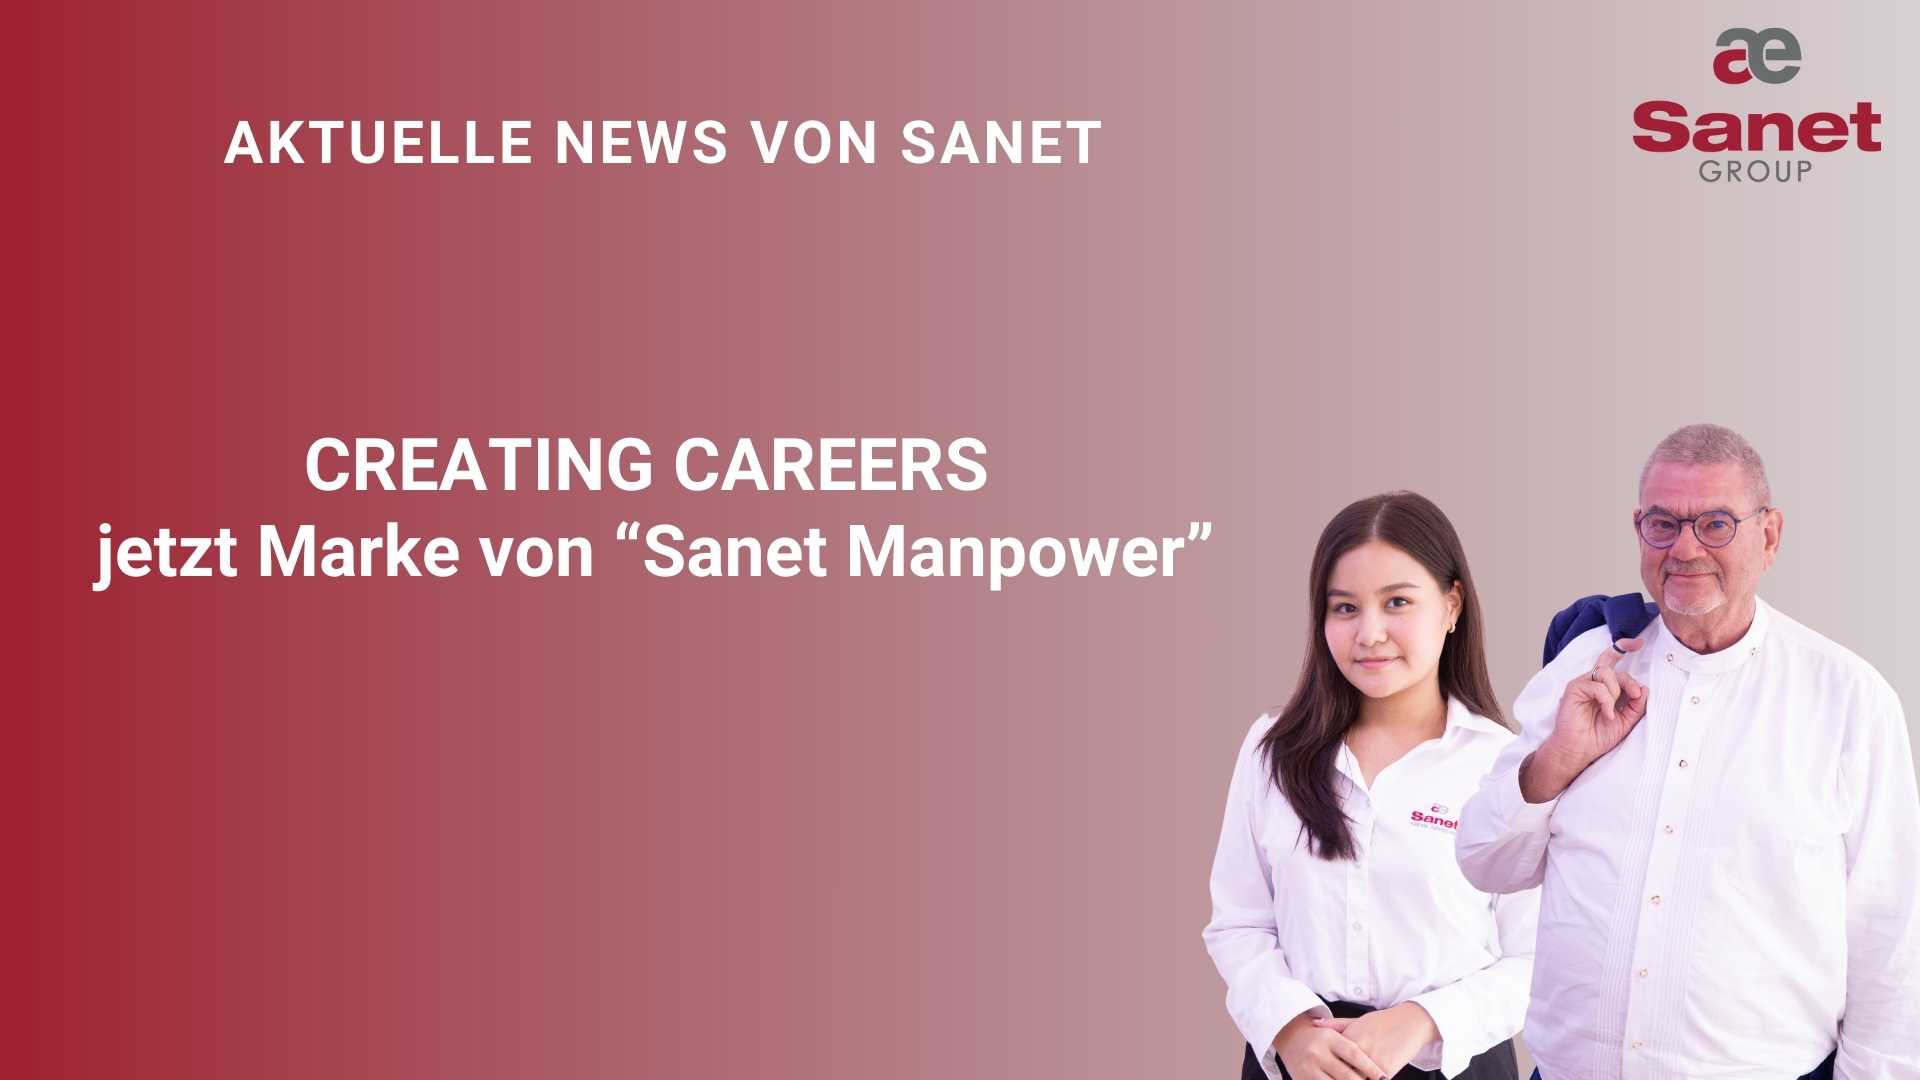 Sanet ASEAN ADVISORS & Manpower Co. Ltd. combines thriving investment and market entry projects with high caliber recruitment in Thailand.